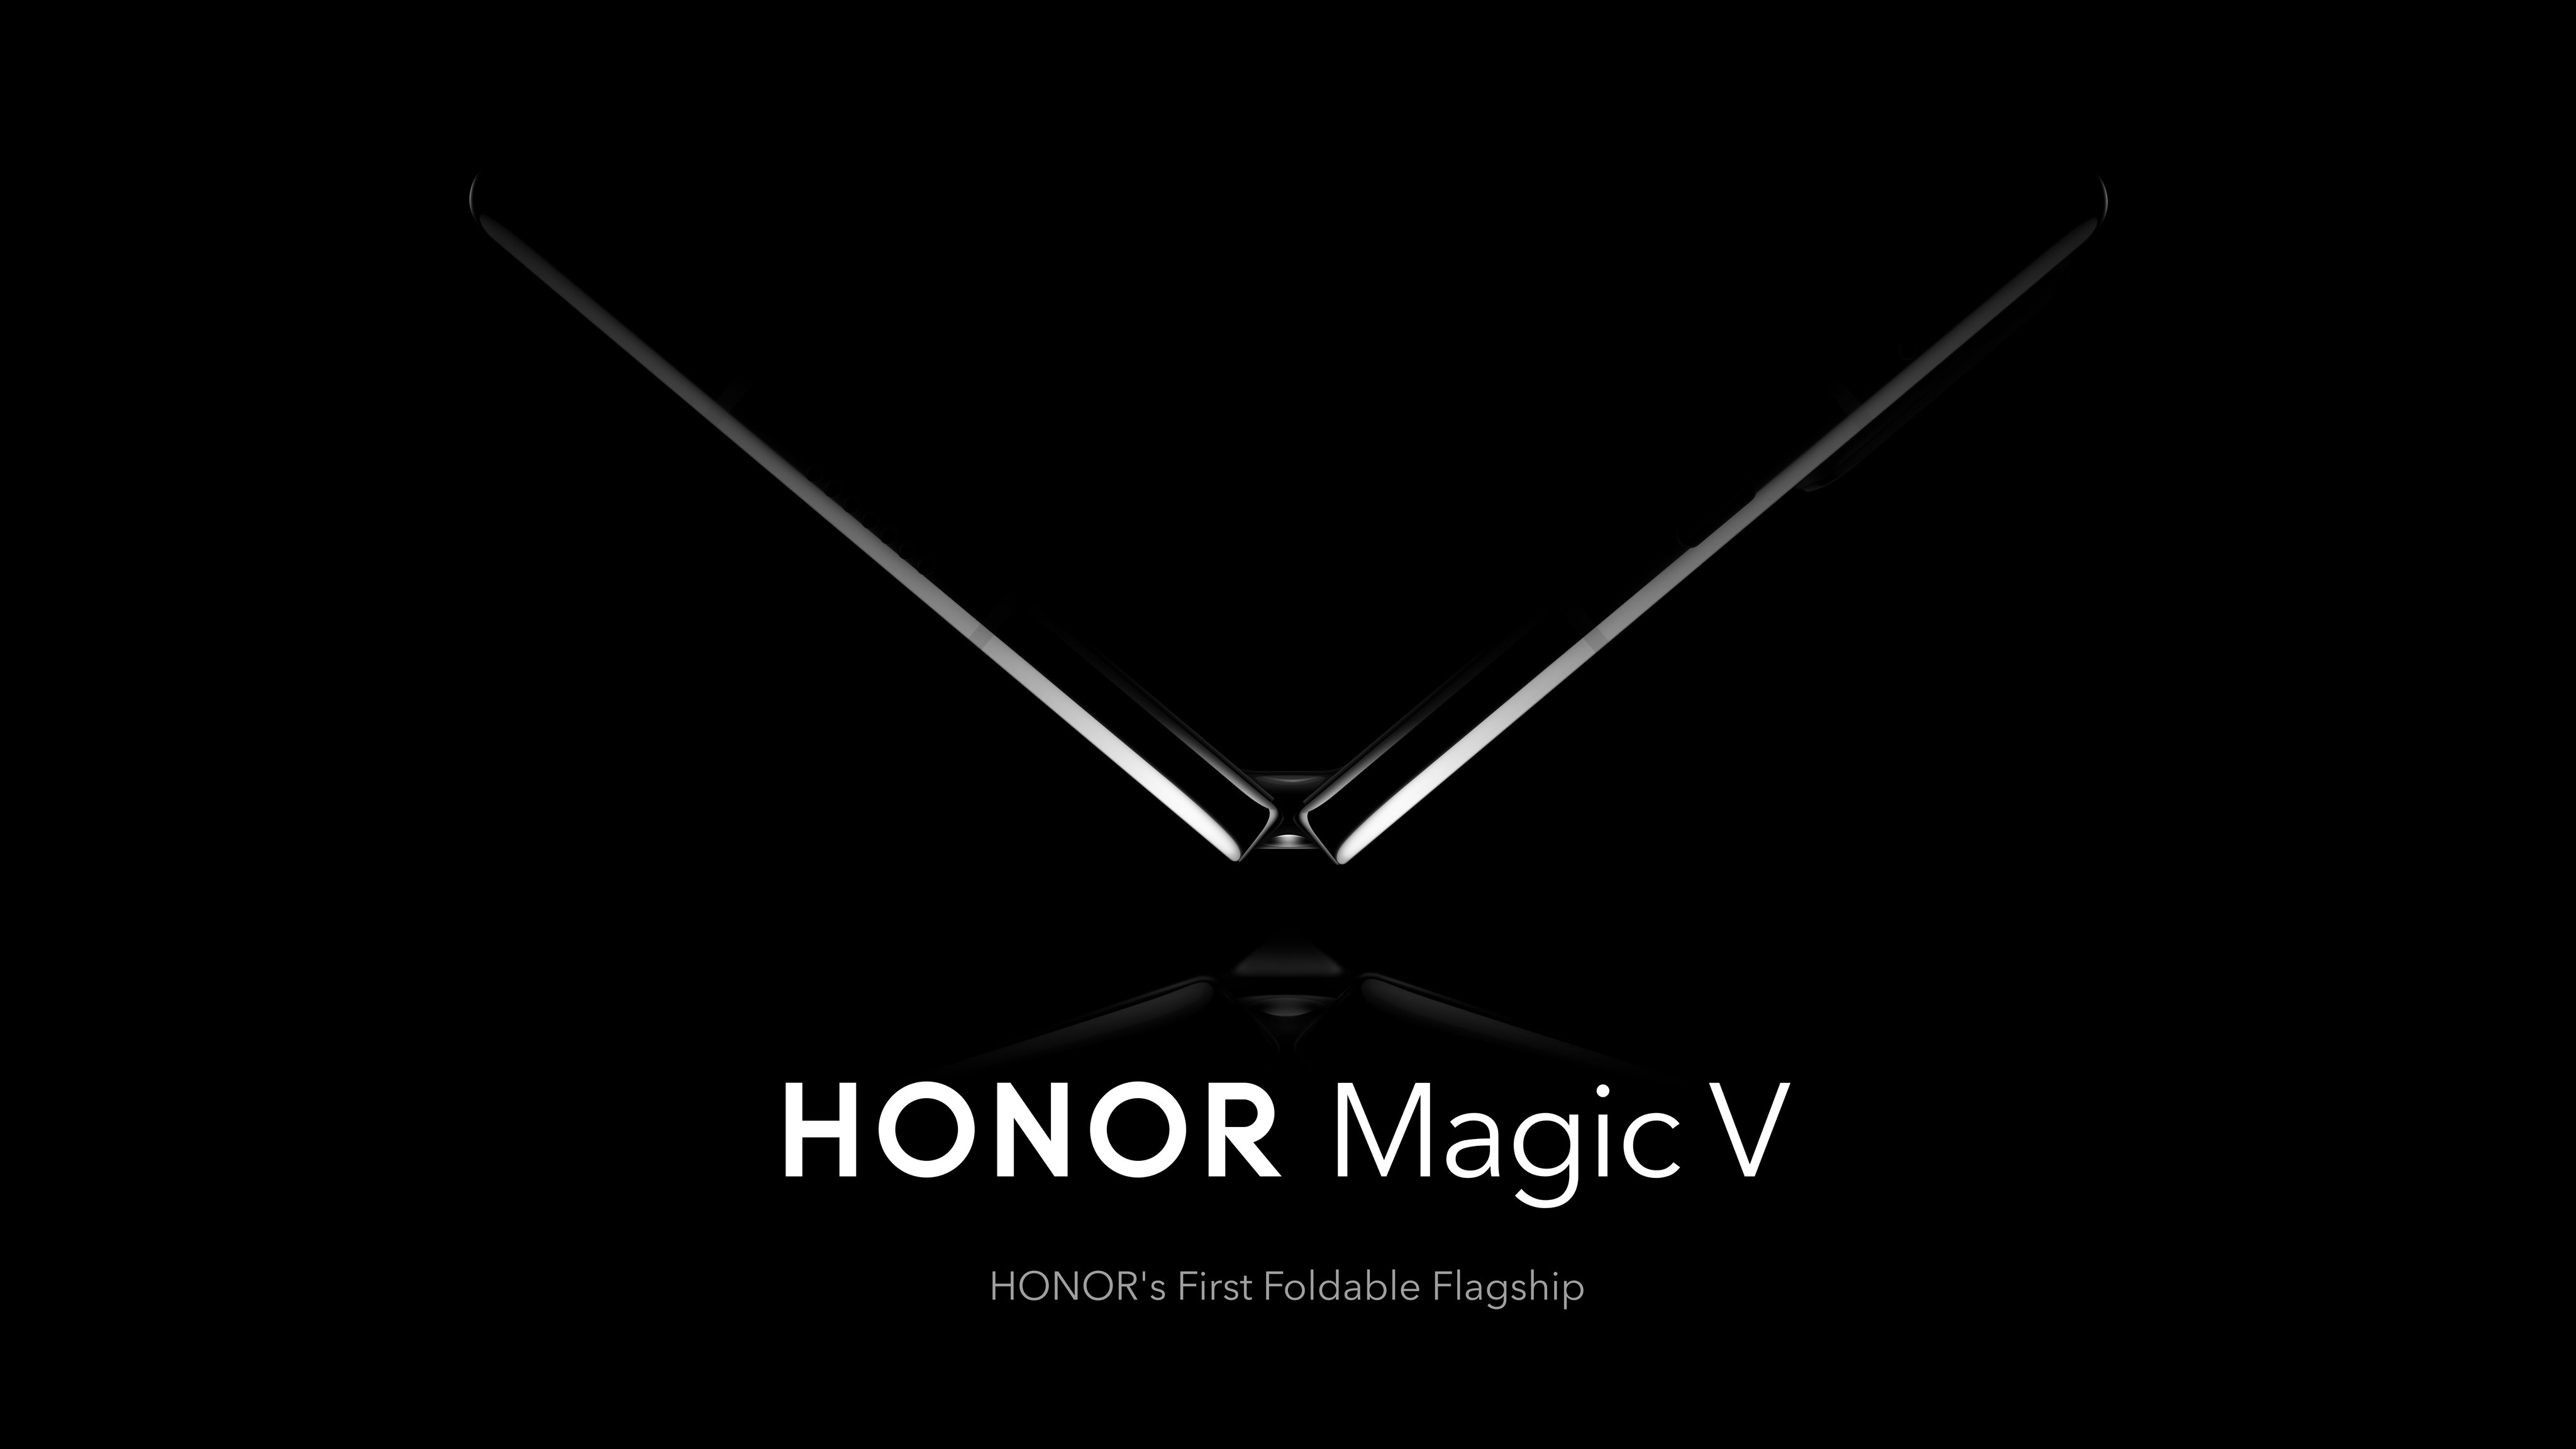 Honor Magic V will be the first foldable smartphone to receive the Snapdragon 8 Gen 1 chip